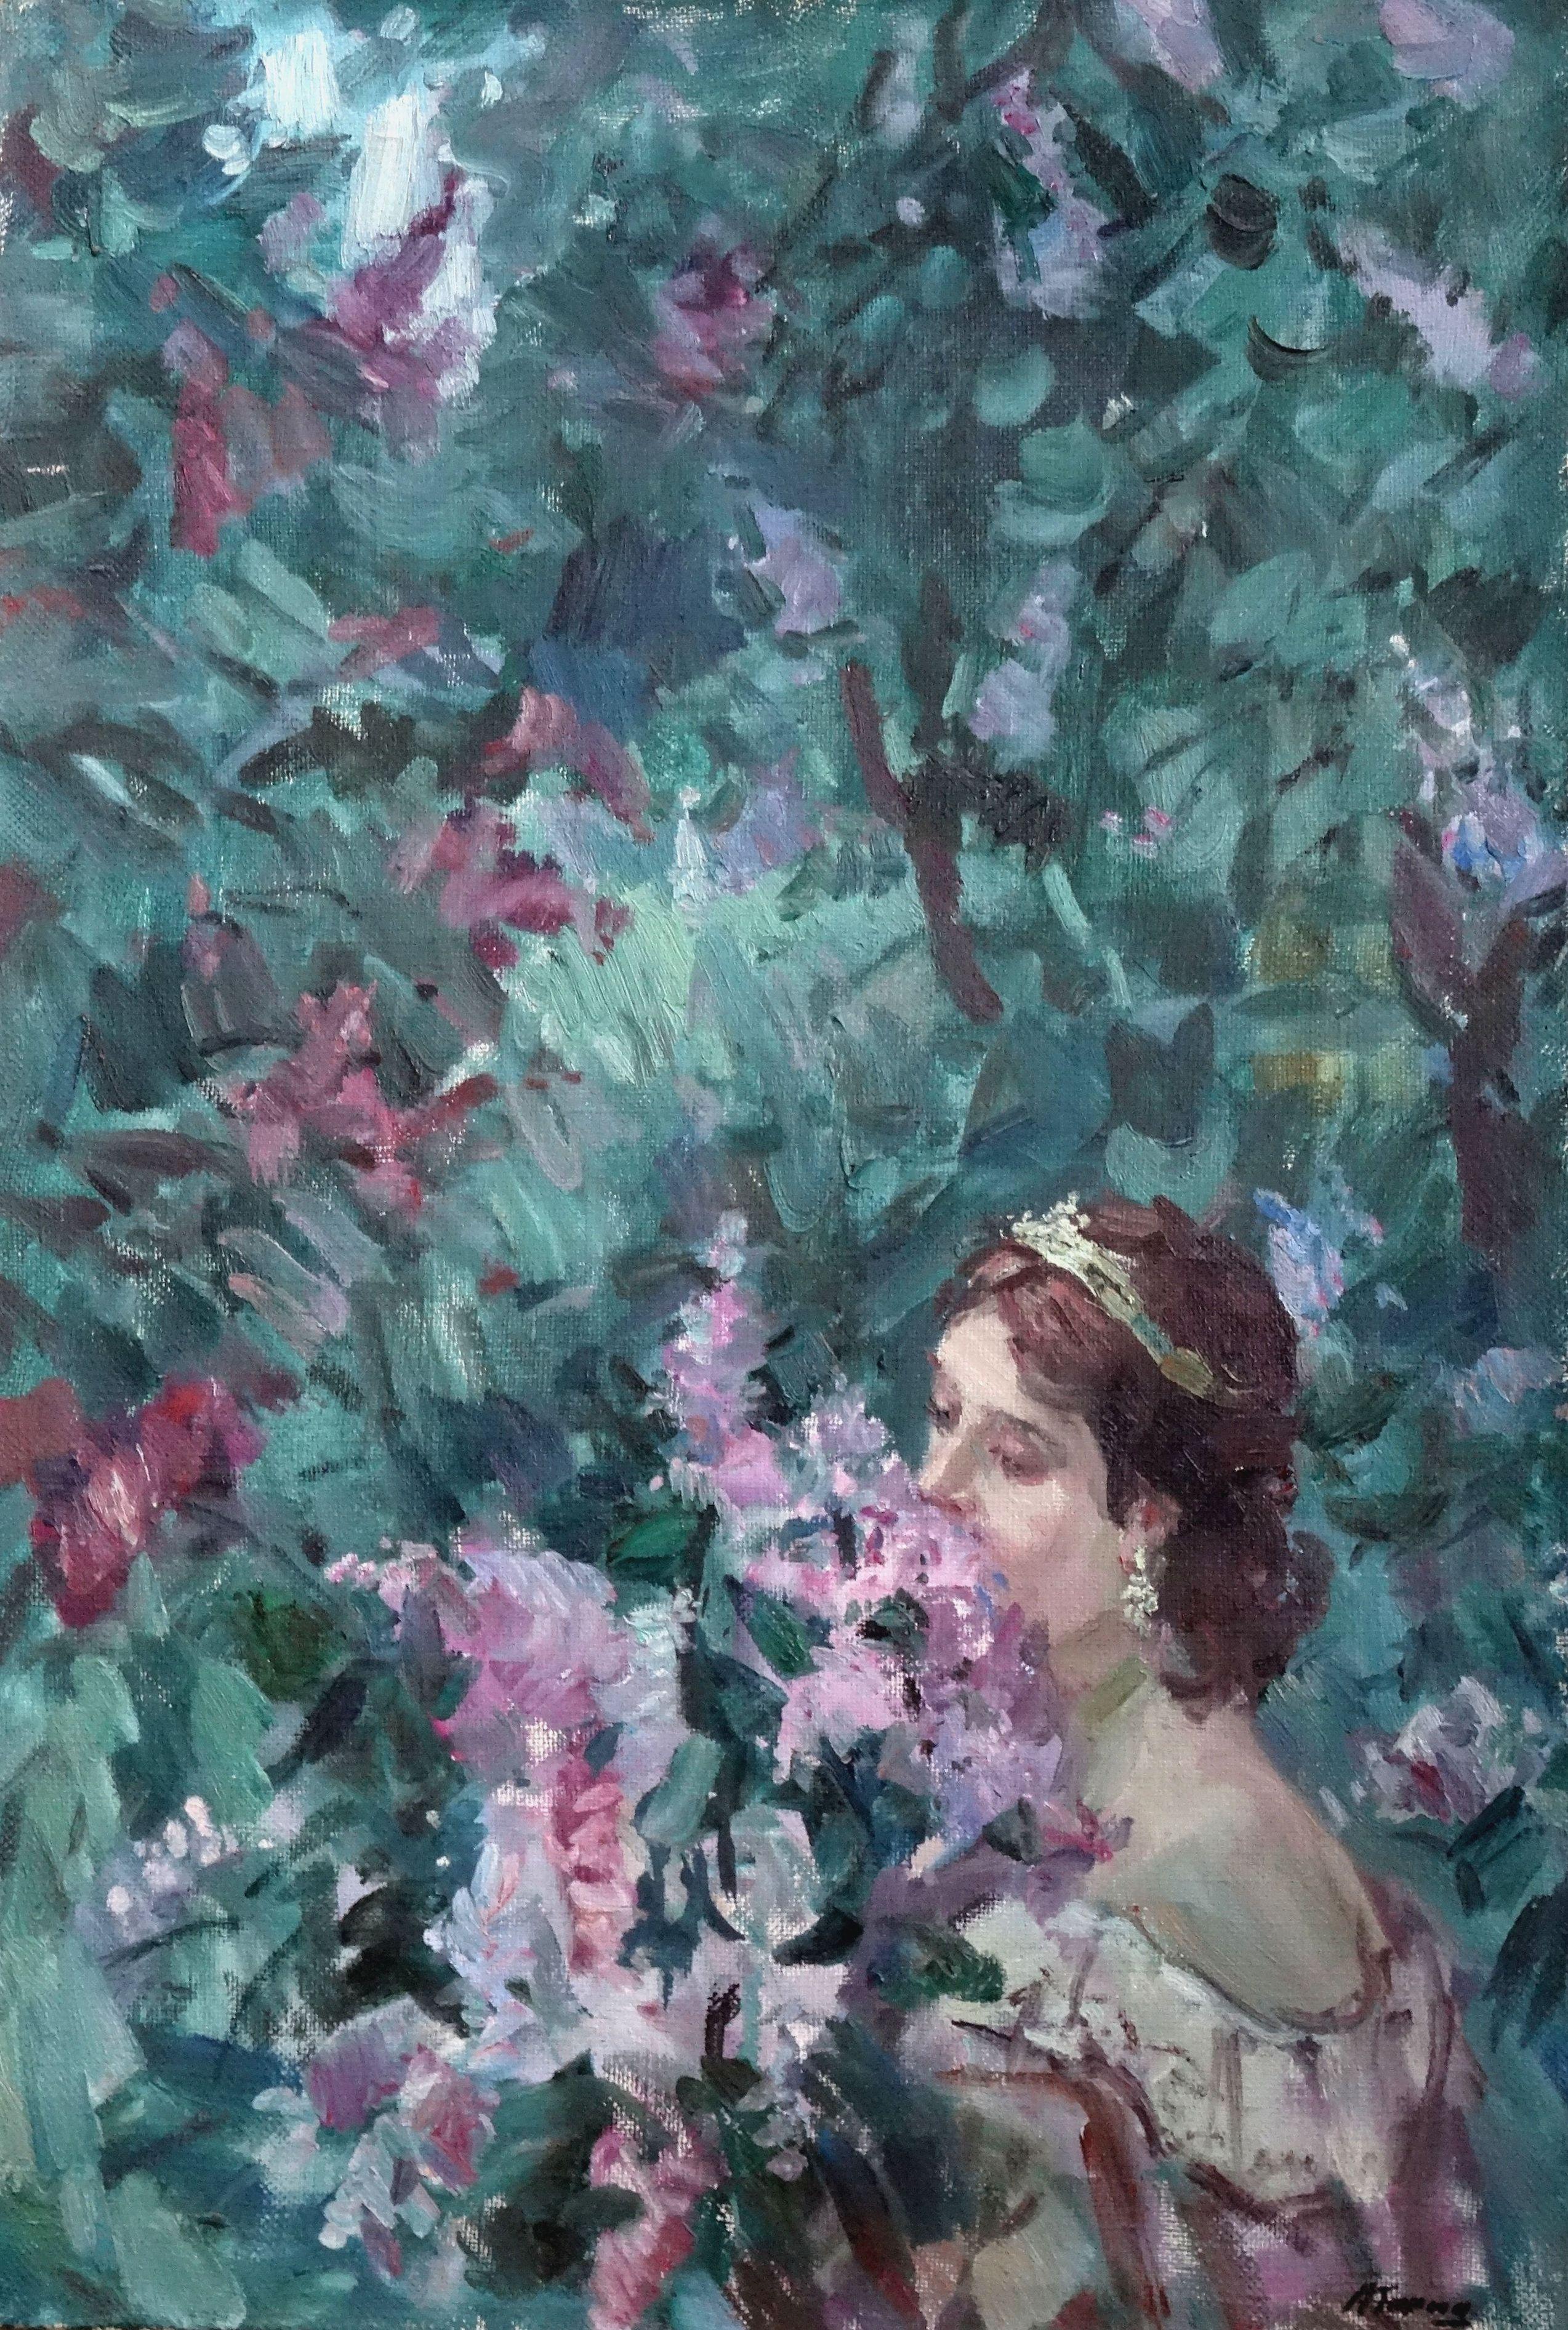 Aleksey Garin Figurative Painting - Lilac bouquet. 1995, oil on canvas, 73x50 cm